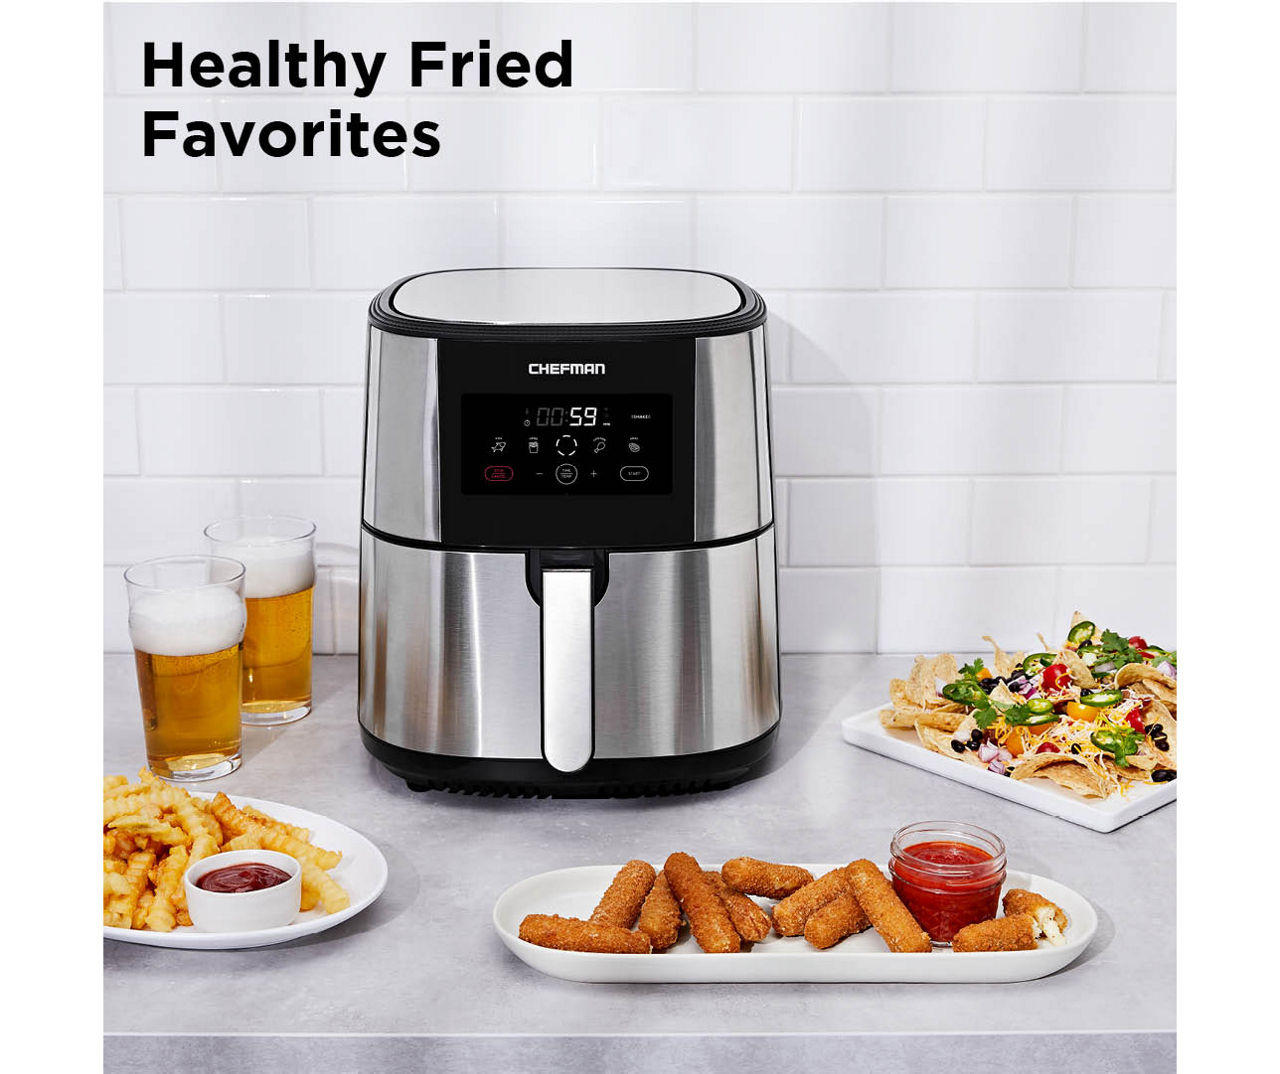 Double up dinner with Chefman's dual-basket 9-qt. Turbo Air Fryer